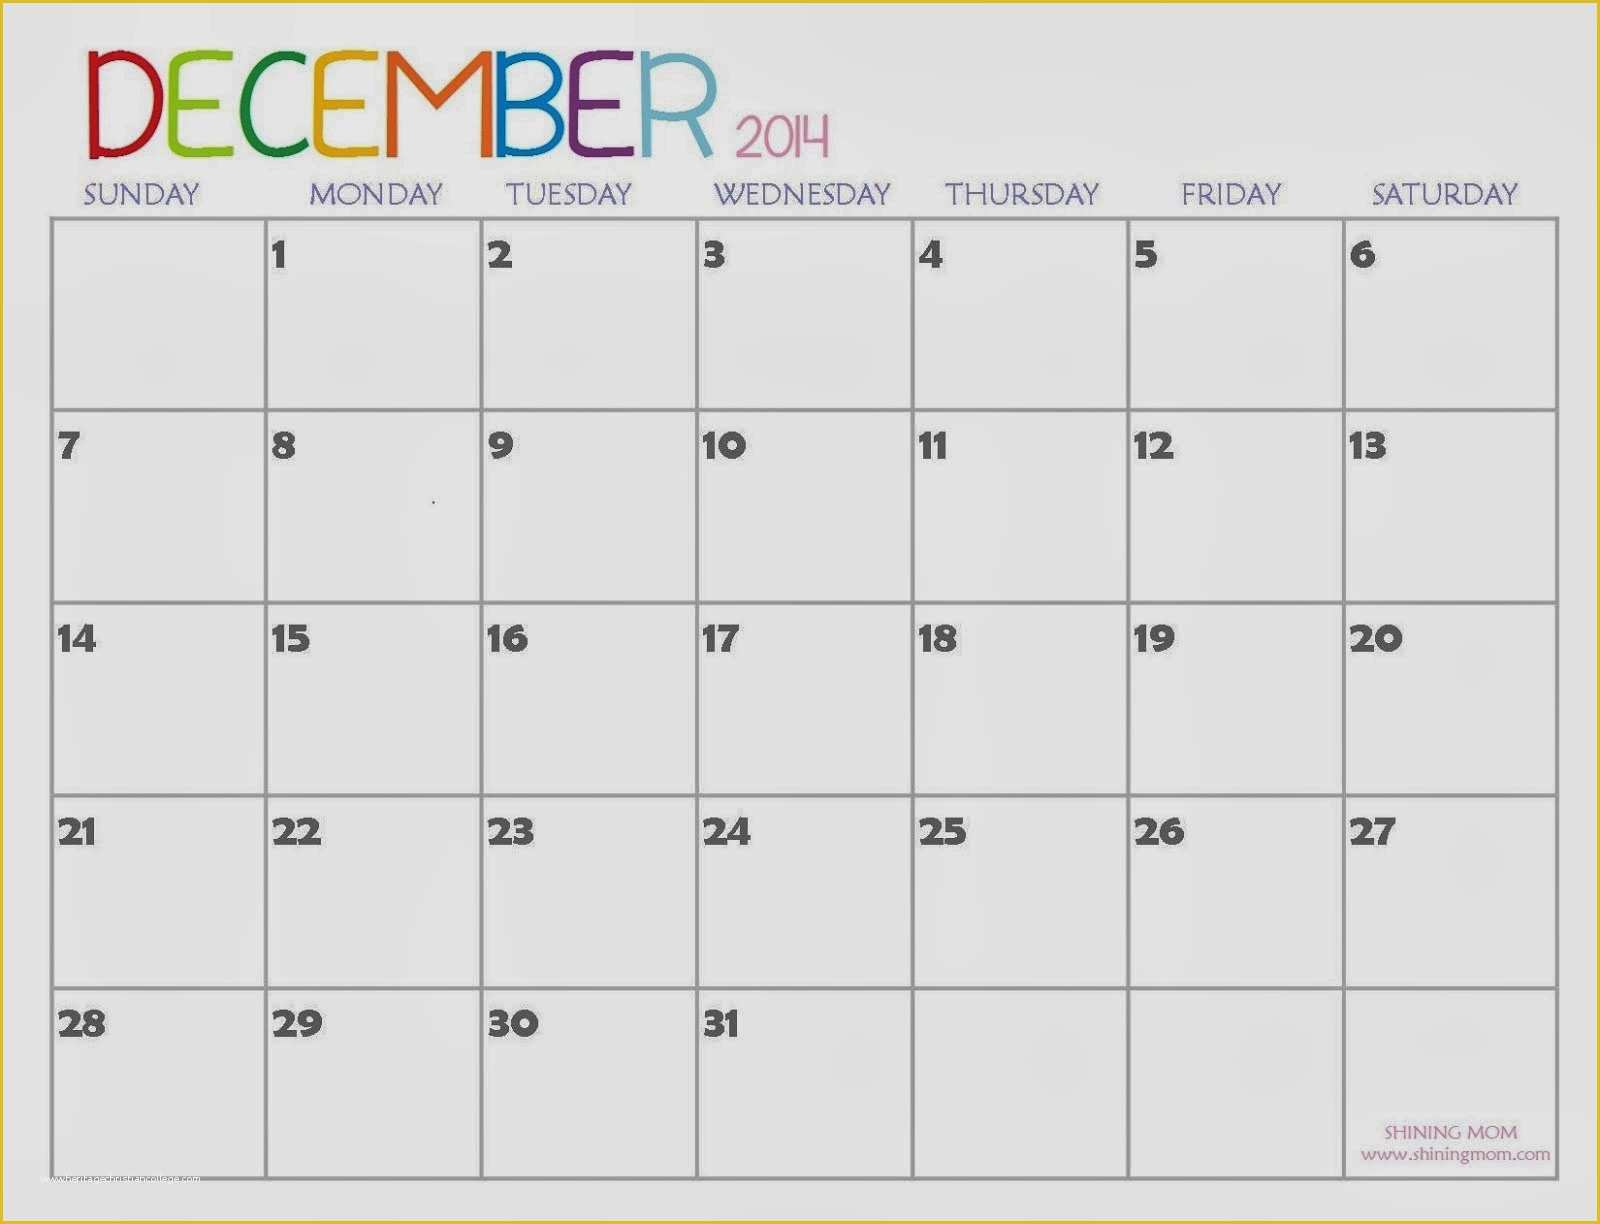 Free Downloadable Calendar Template Of Free Printable Calendar Free Printable Calendar December